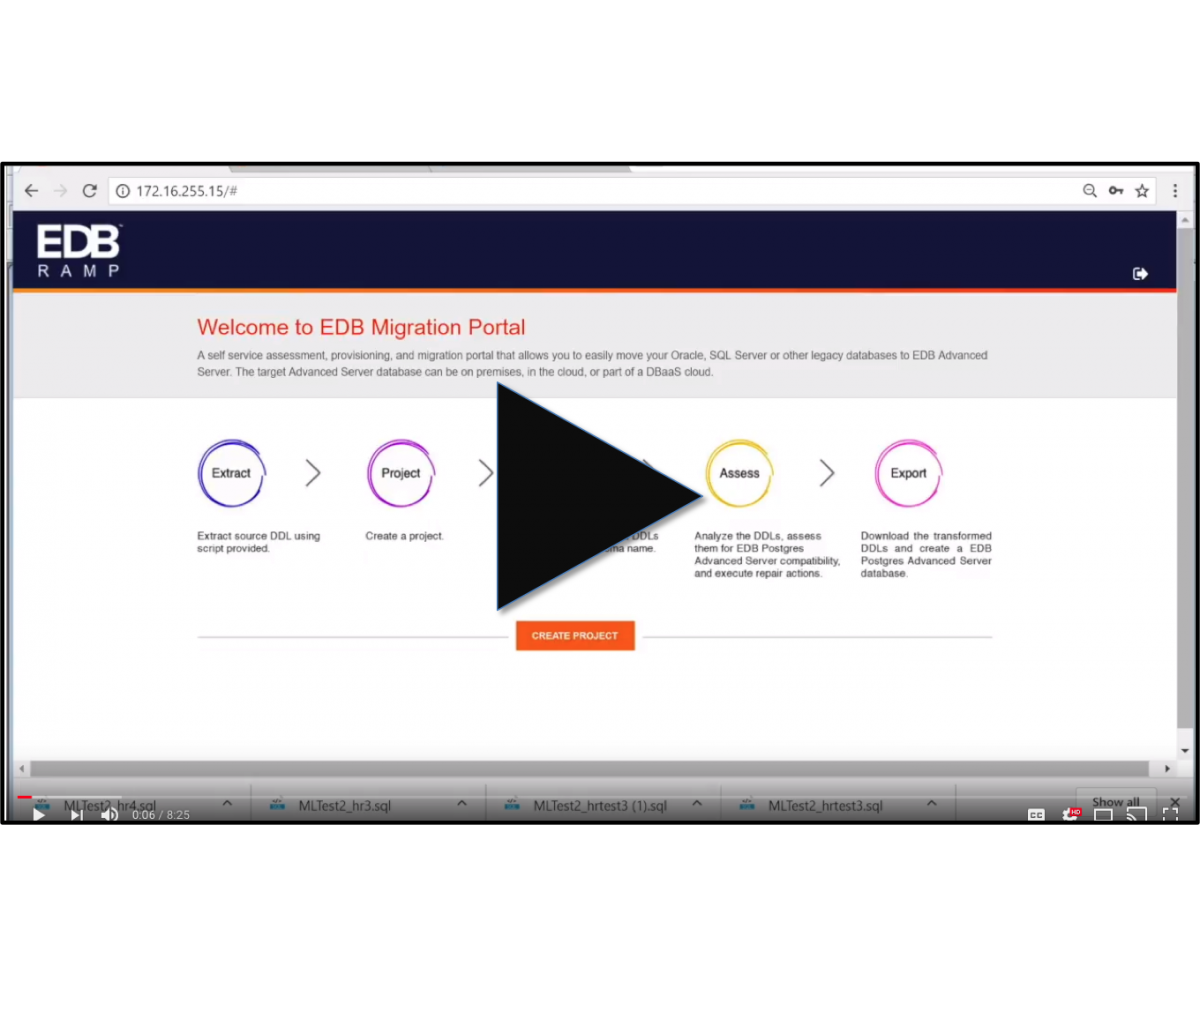 Click to view a demo of the migration portal